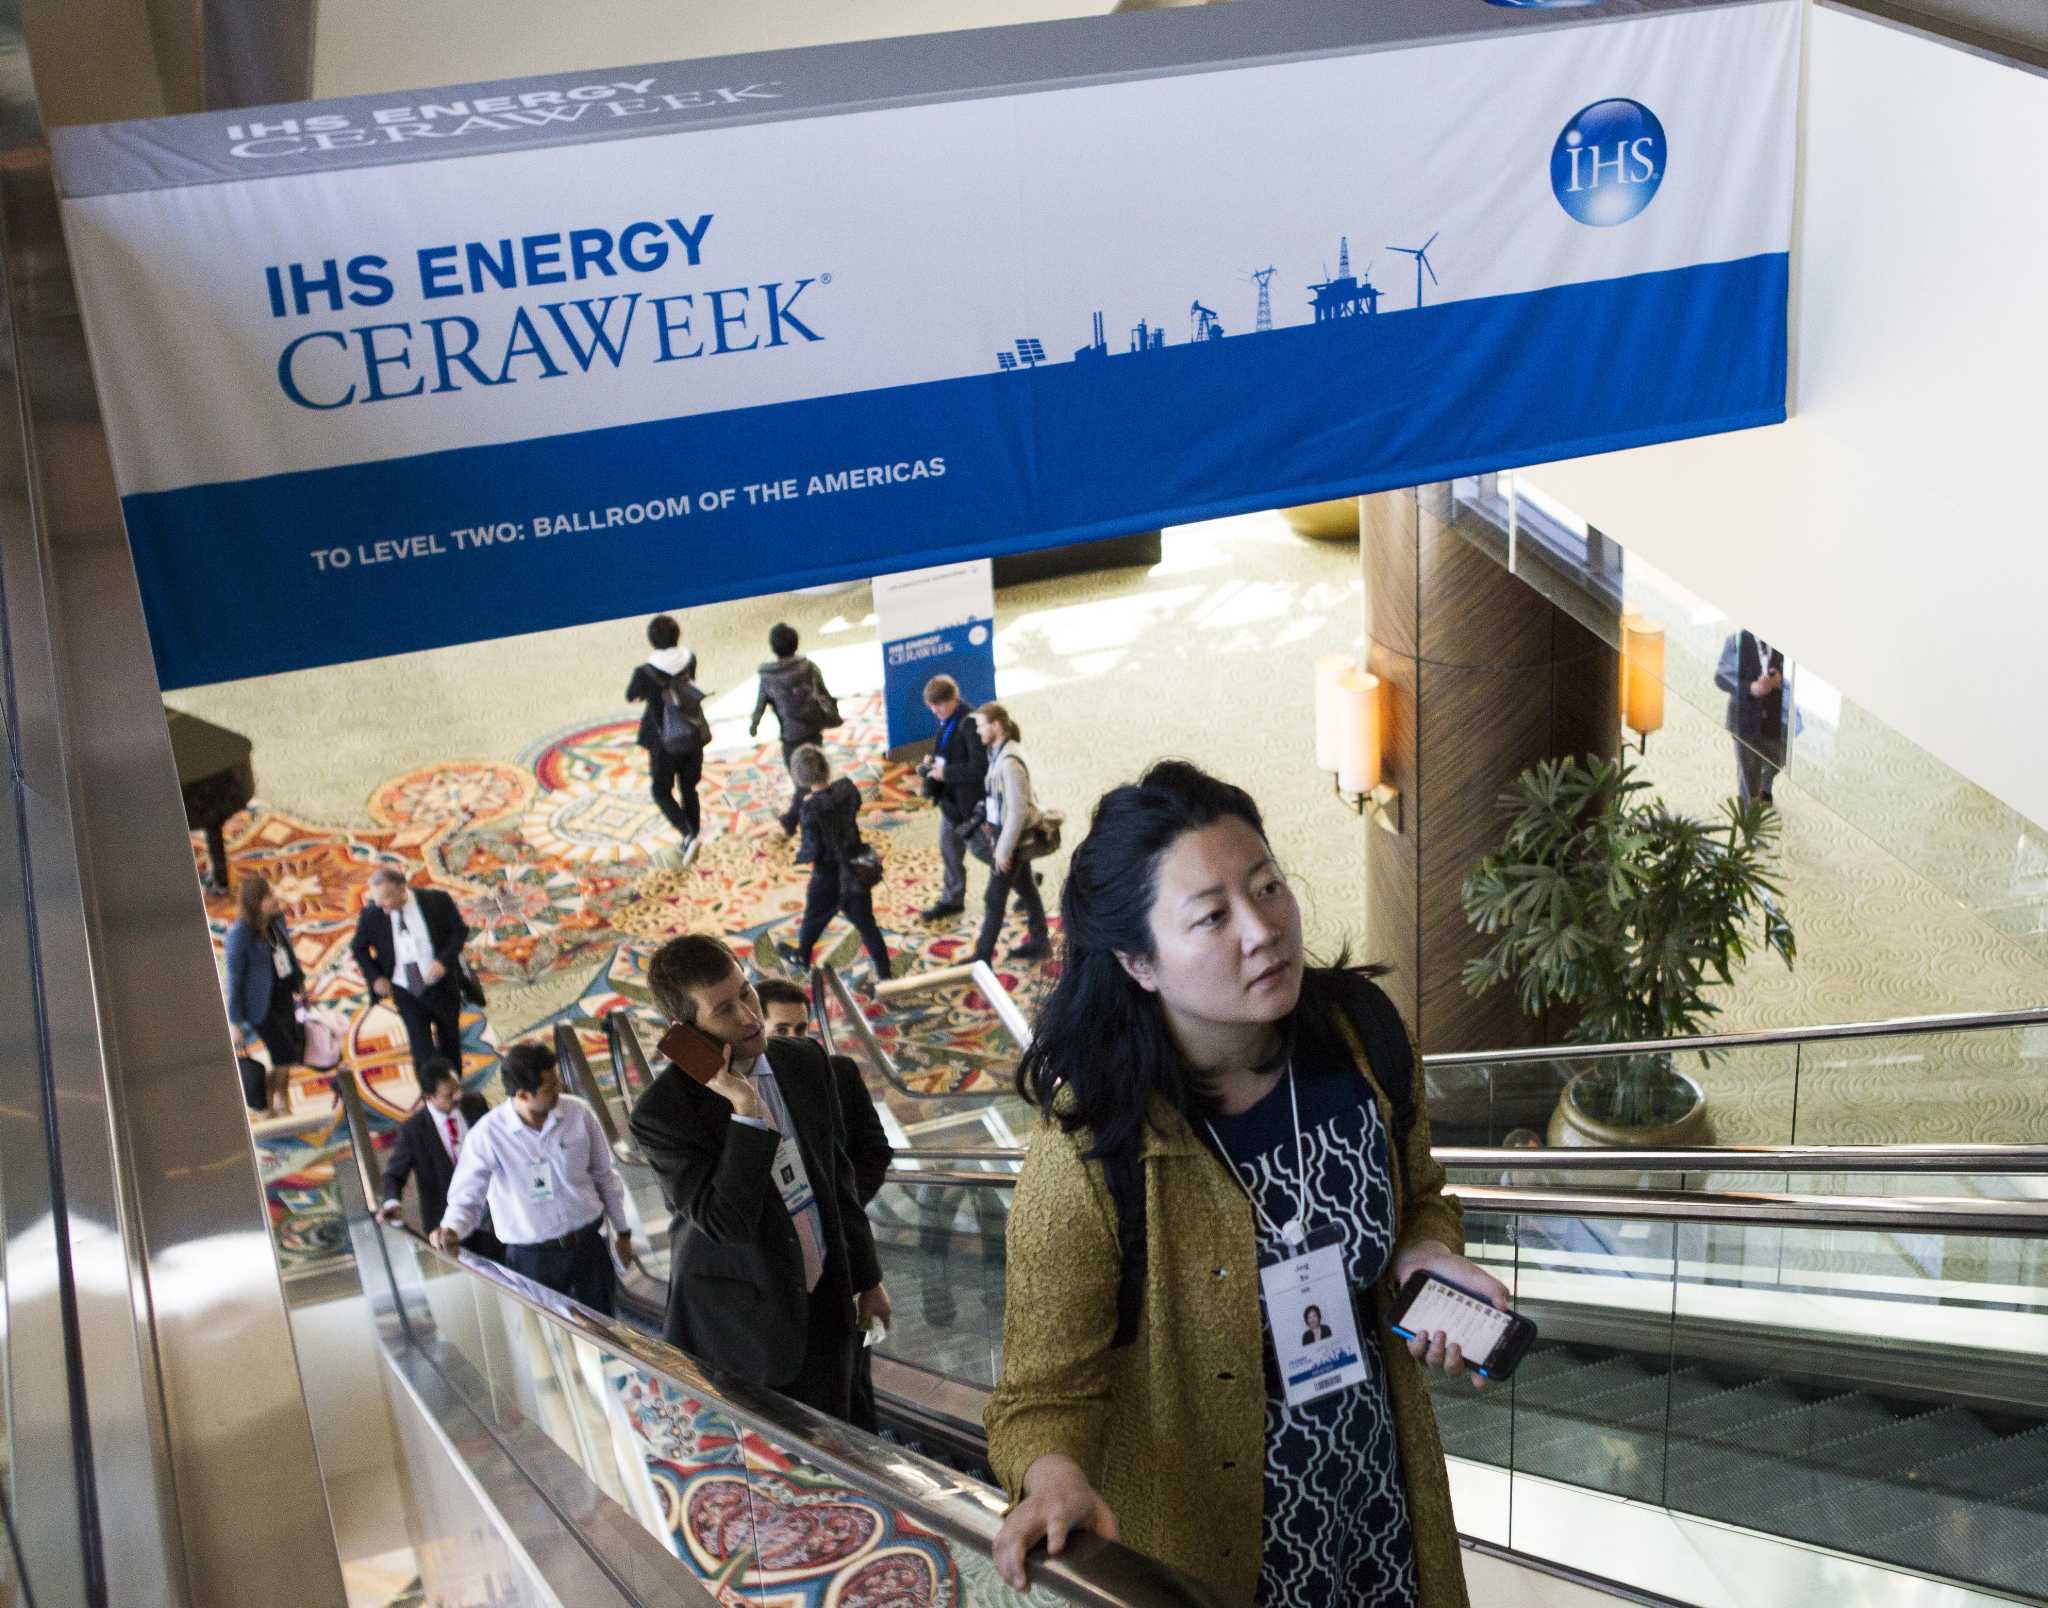 At CERAWeek, ‘forces of change’ expected to dominate conversation